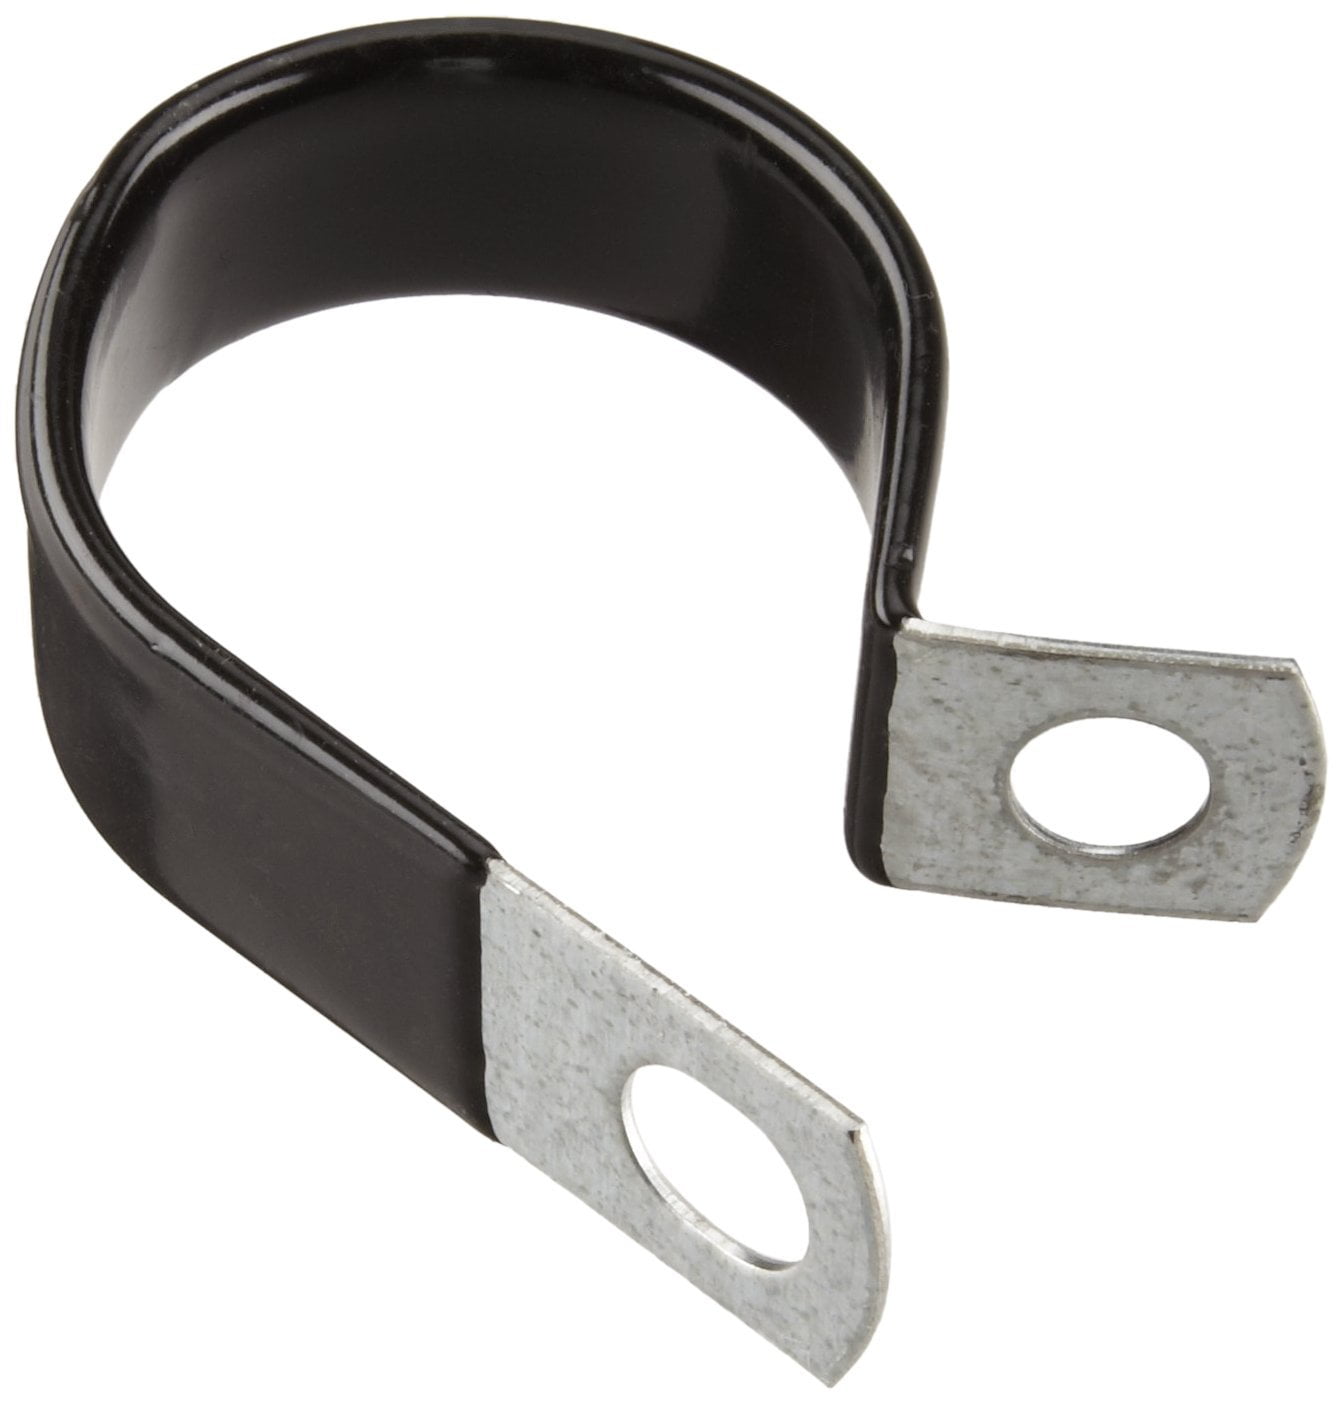 pack of 25 3/4" Cushion Clamps 